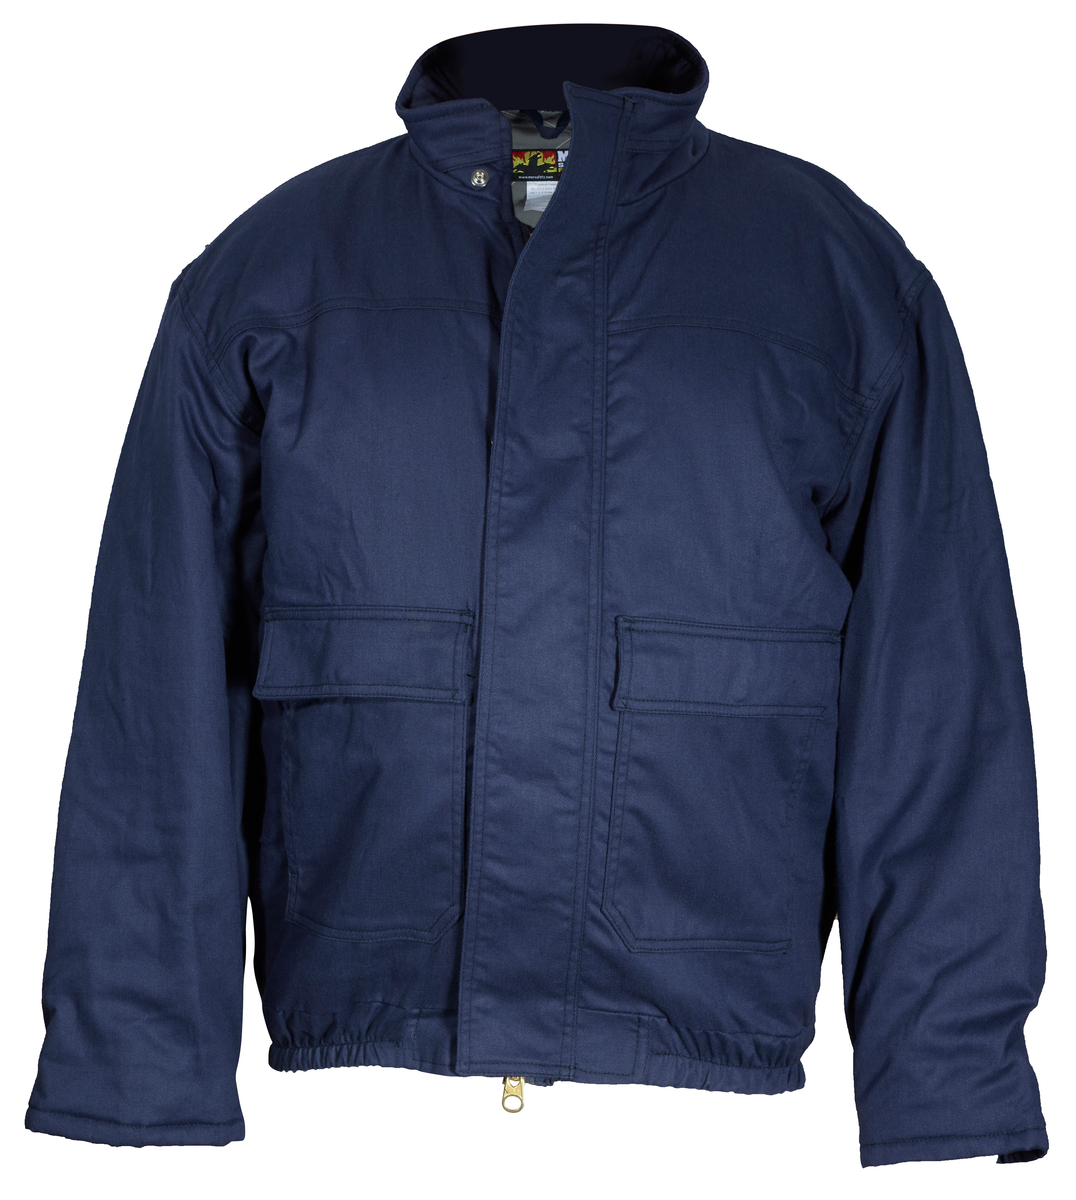 Flame Resistant (FR) Insulated Bomber Jacket, Max Comfort ™ Material, Modacrylic quilted lining, Navy